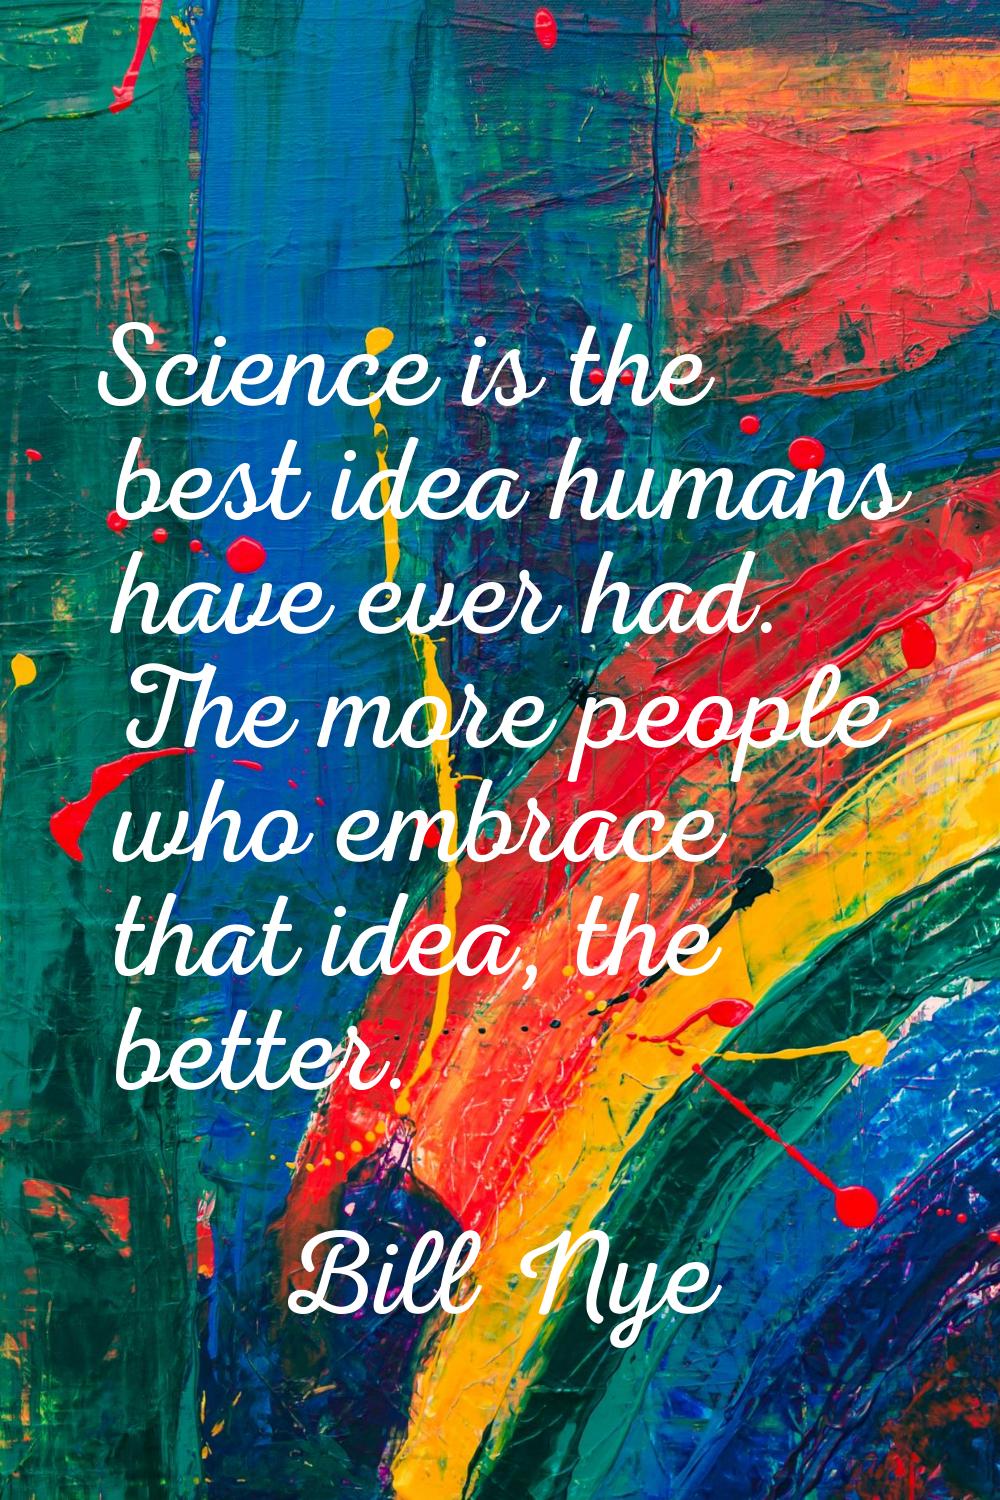 Science is the best idea humans have ever had. The more people who embrace that idea, the better.